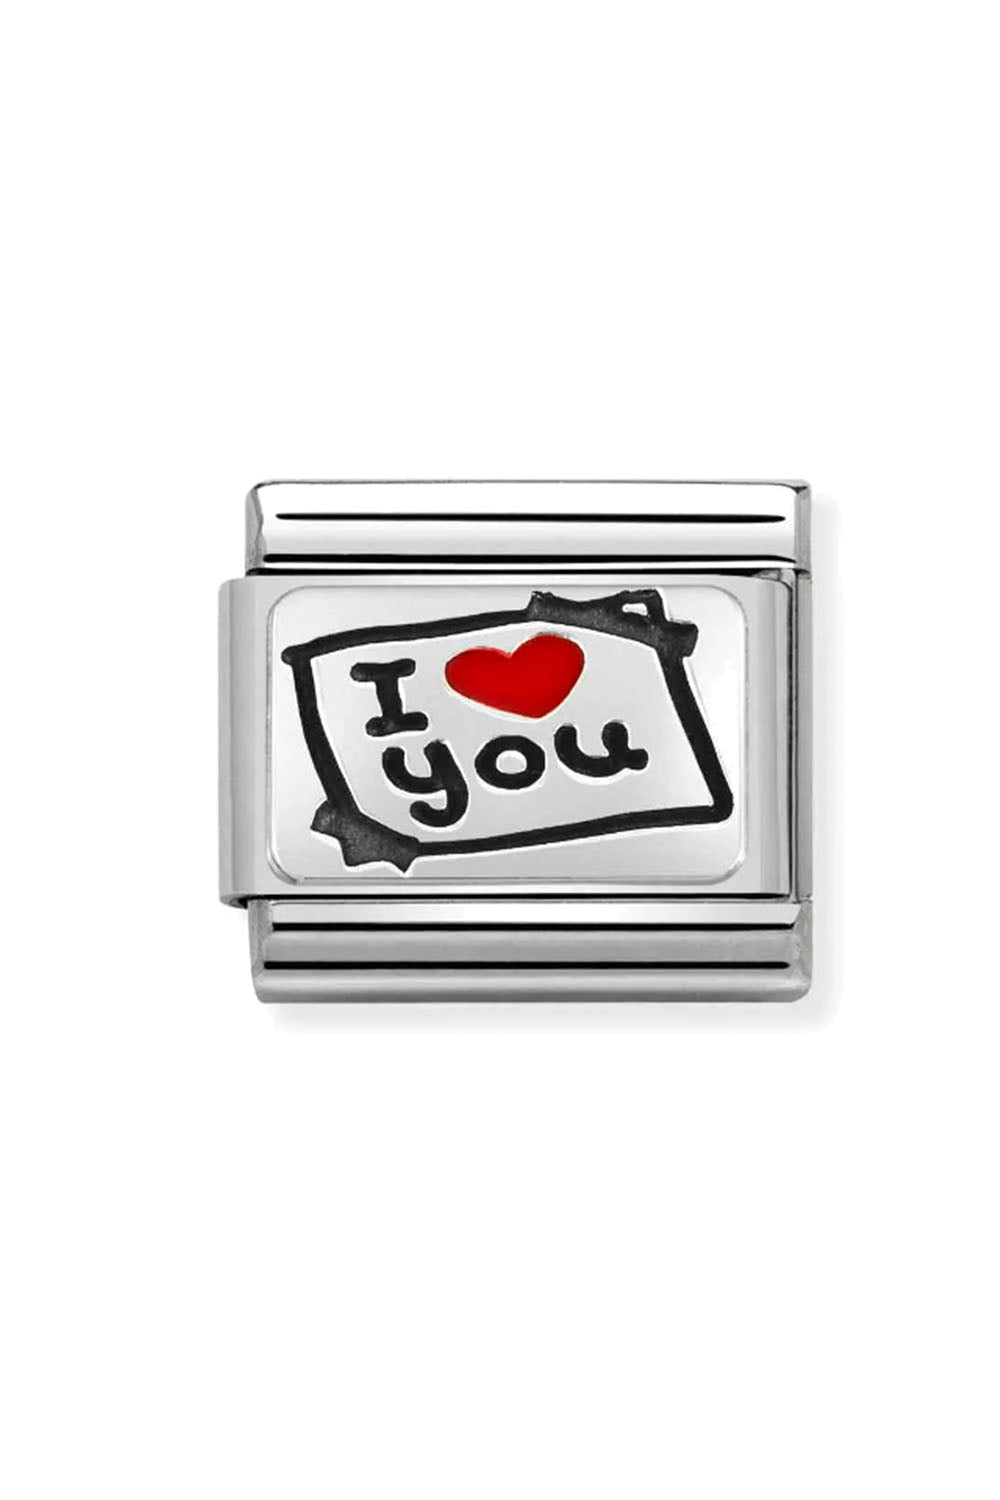 Oxidised plate 925 sterling Silver and Enamel I love you card